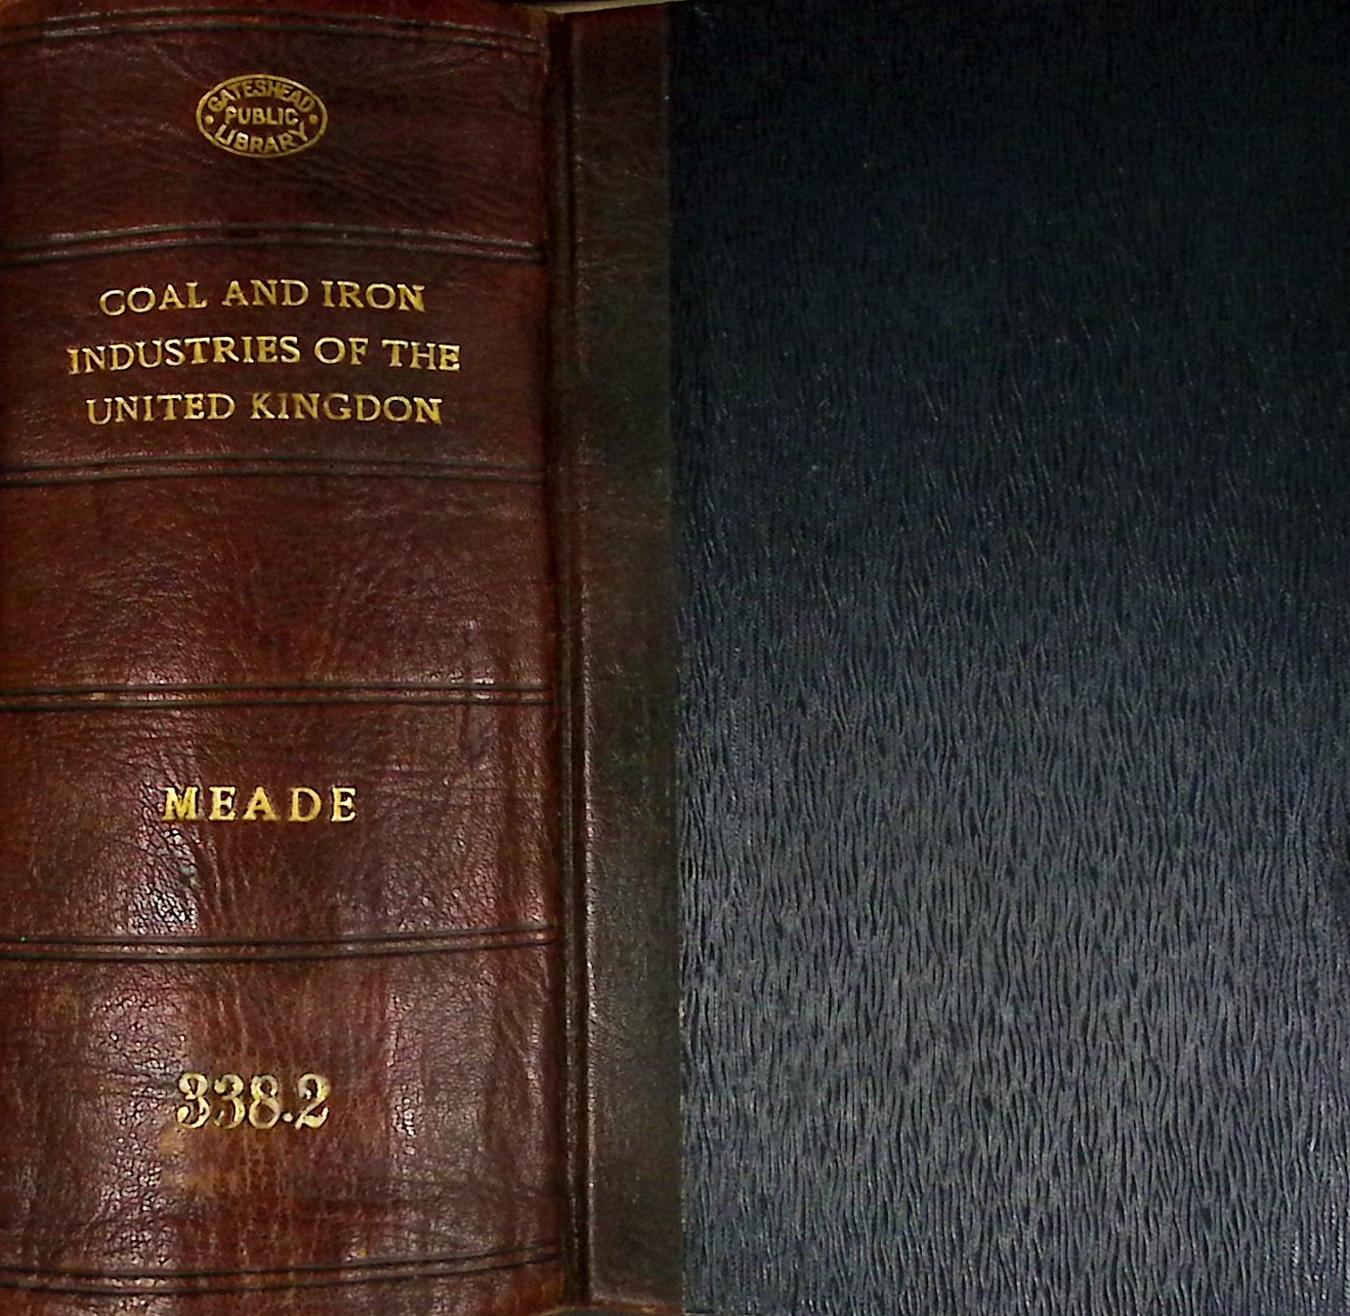 The Coal and Iron Industries of the United Kingdom. Comprising a Description of the Coal-Fields, and of the Principal Seams of Coal with Returns of their Produce and its Distribution, and Analyses of Special Varieties. ...